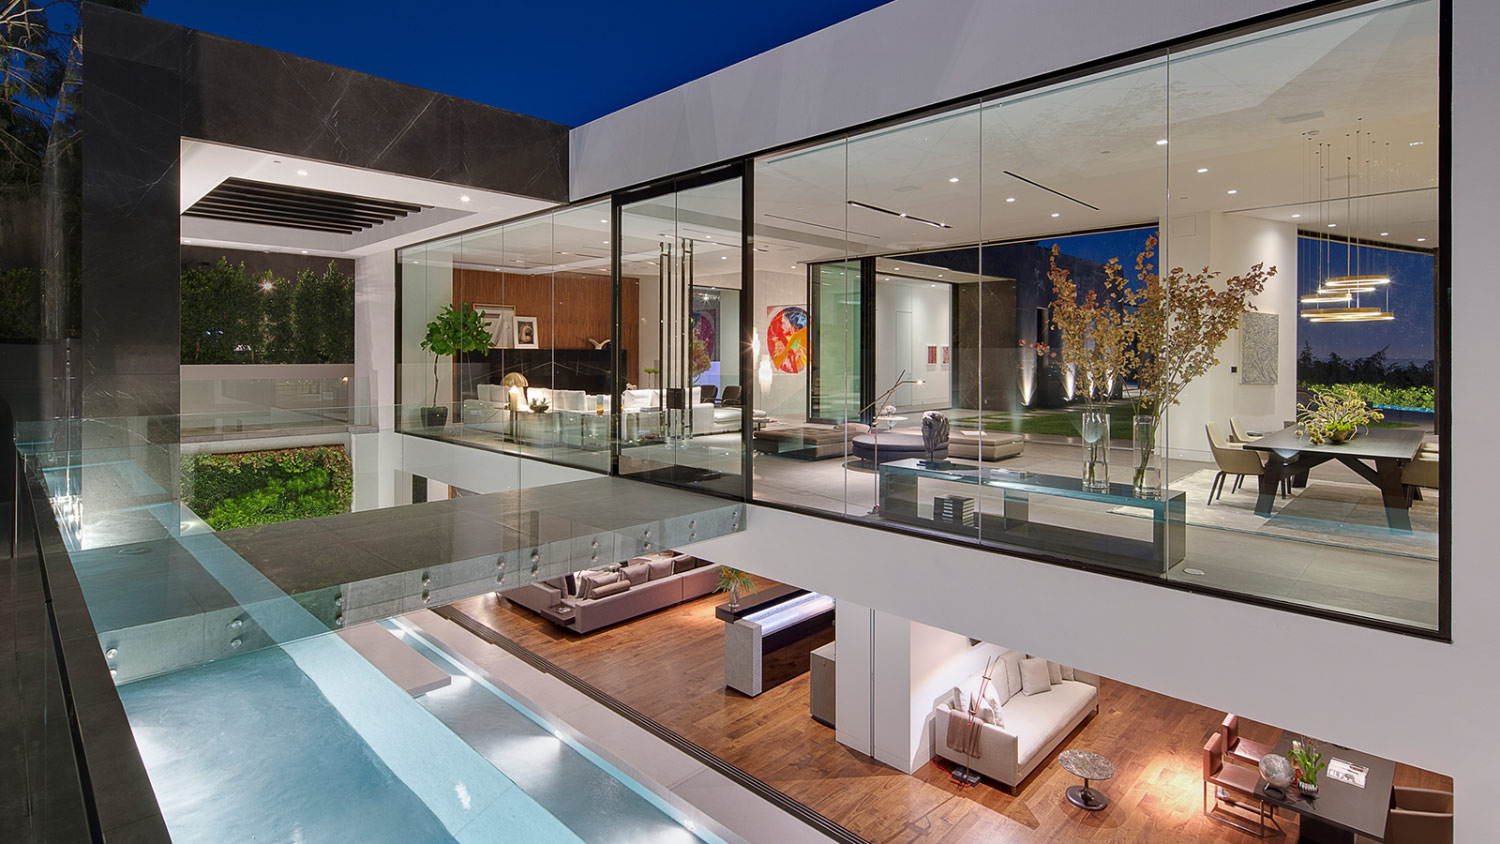 Amazing Tanager Way mansion in Los Angeles perfect for famous fashion designer